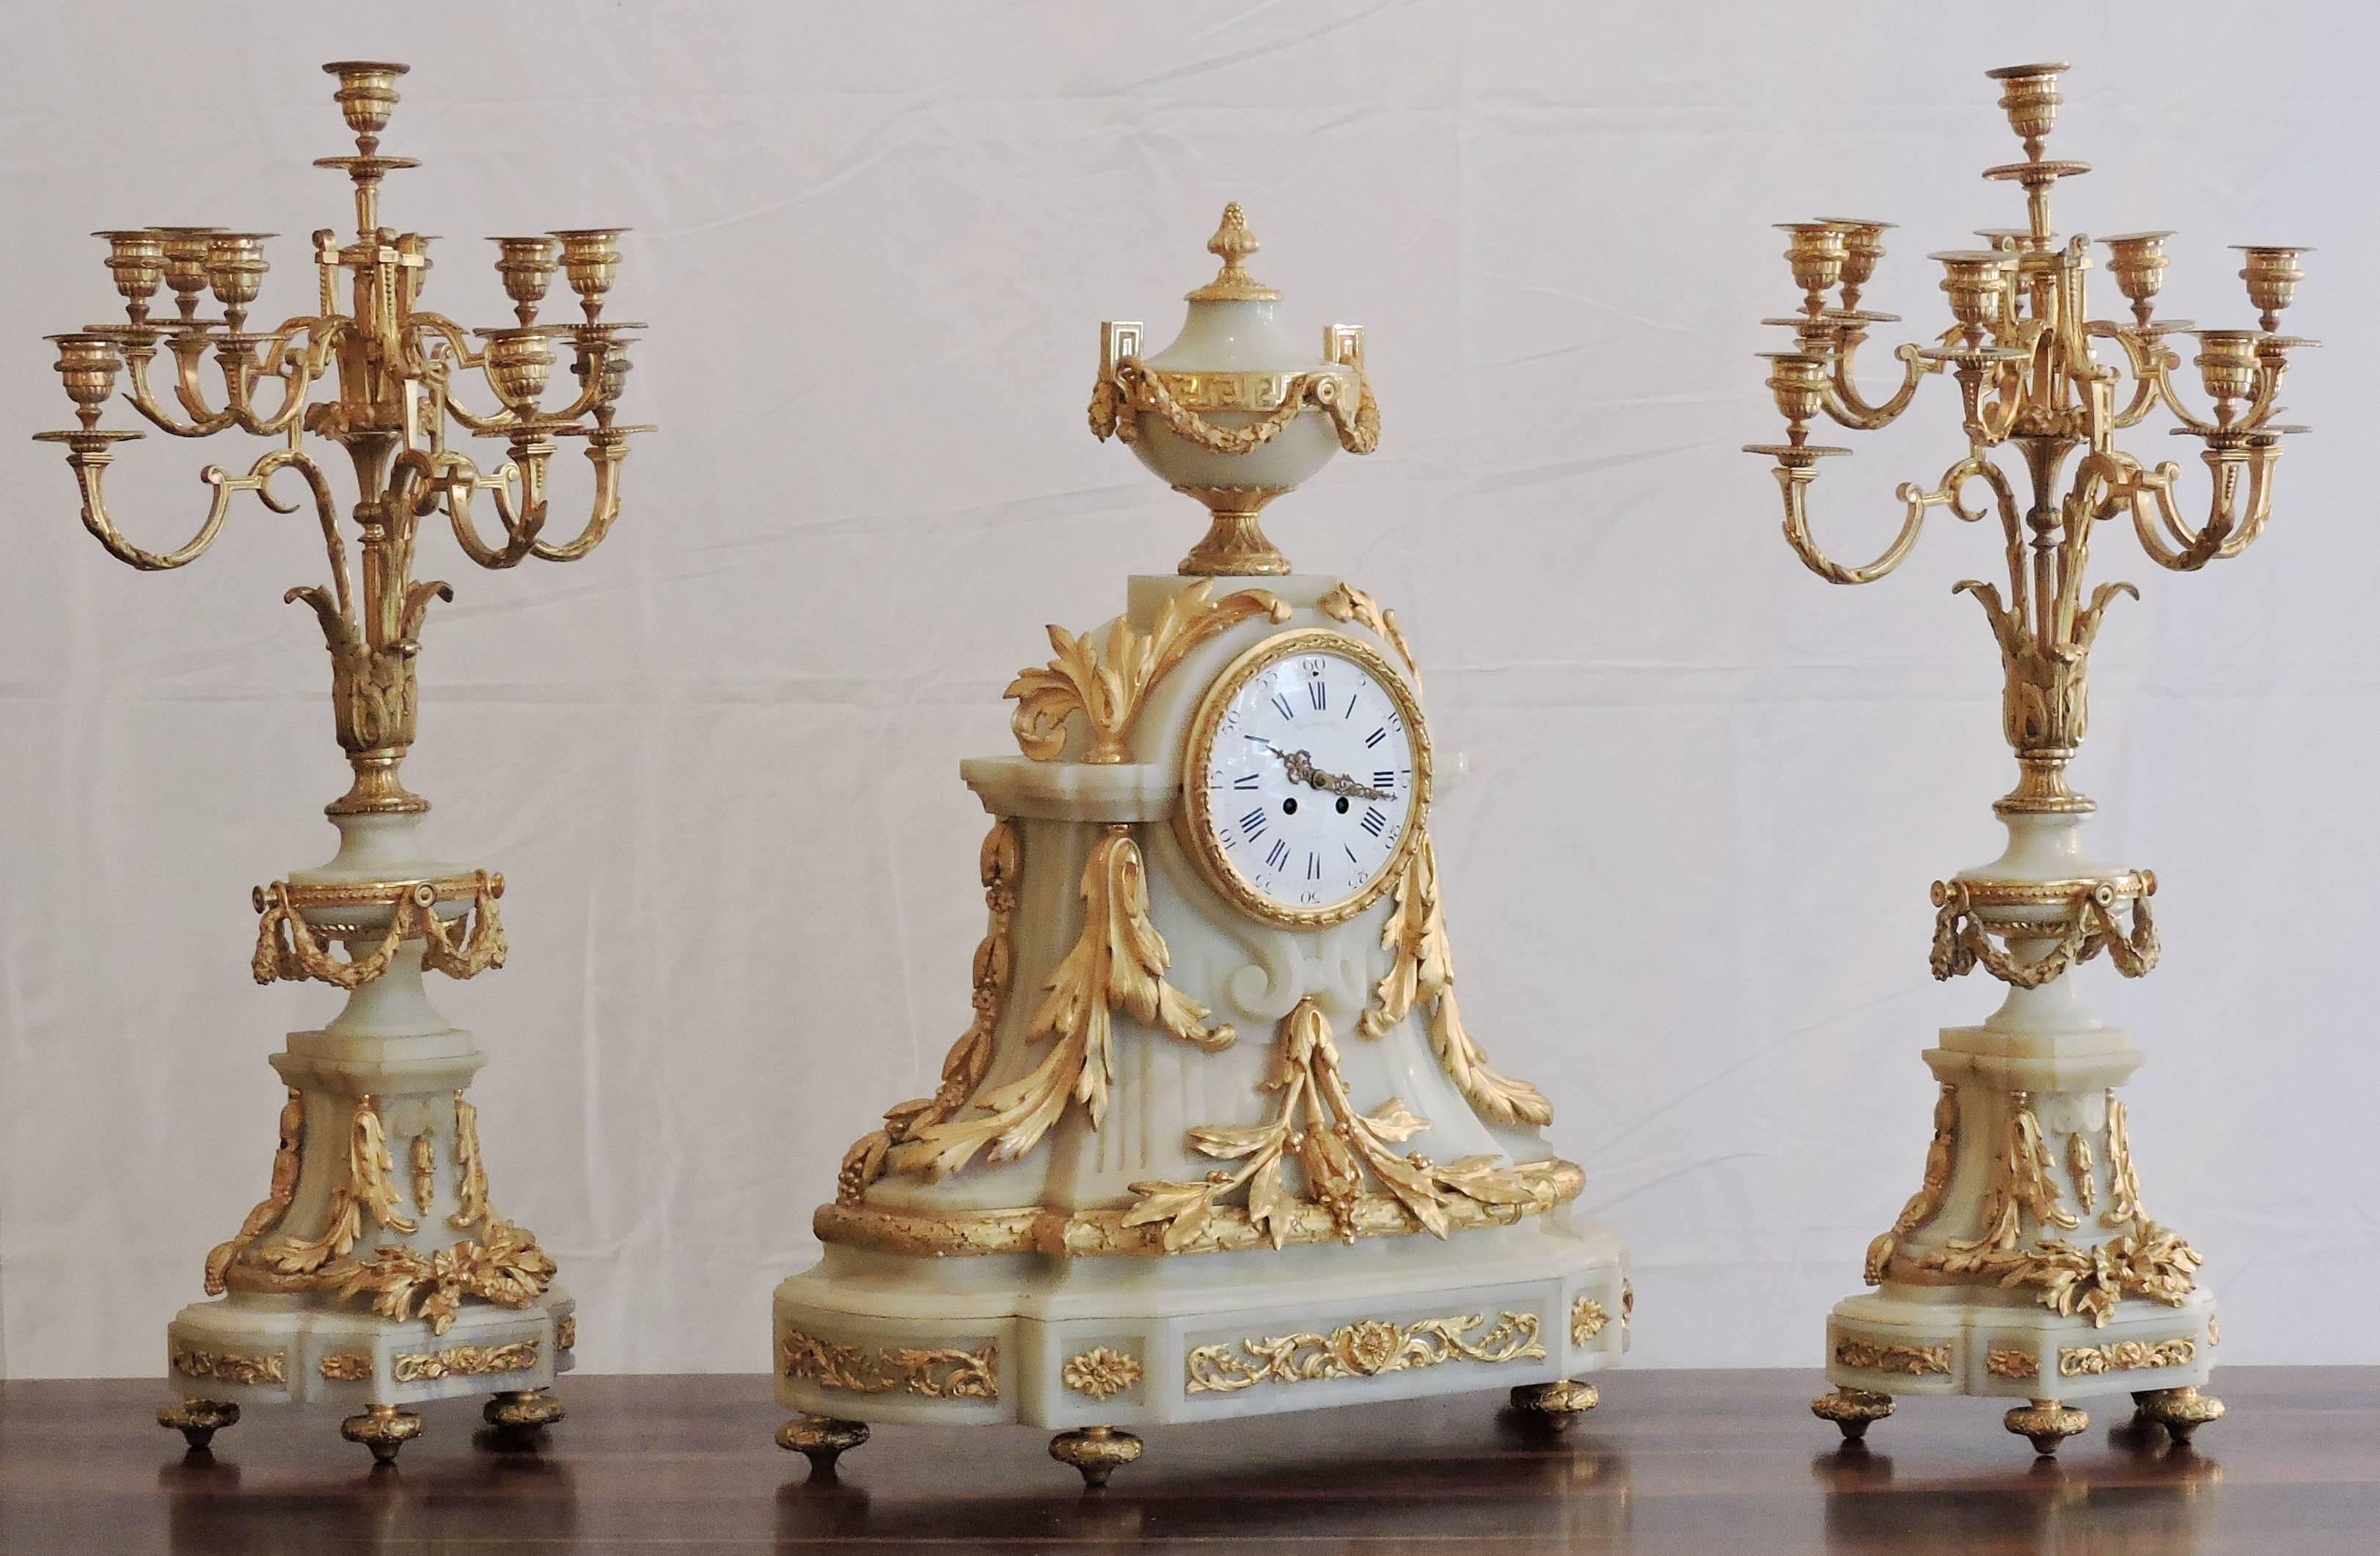 Comprising a clock and a pair of ten-light candelabra, this is an impressive piece of 19th century taste and style by Raingo Brothers (Raingo Frères). 

Above the French mantel clock, a classic from of urn is garnished with Greek fret and a laurel